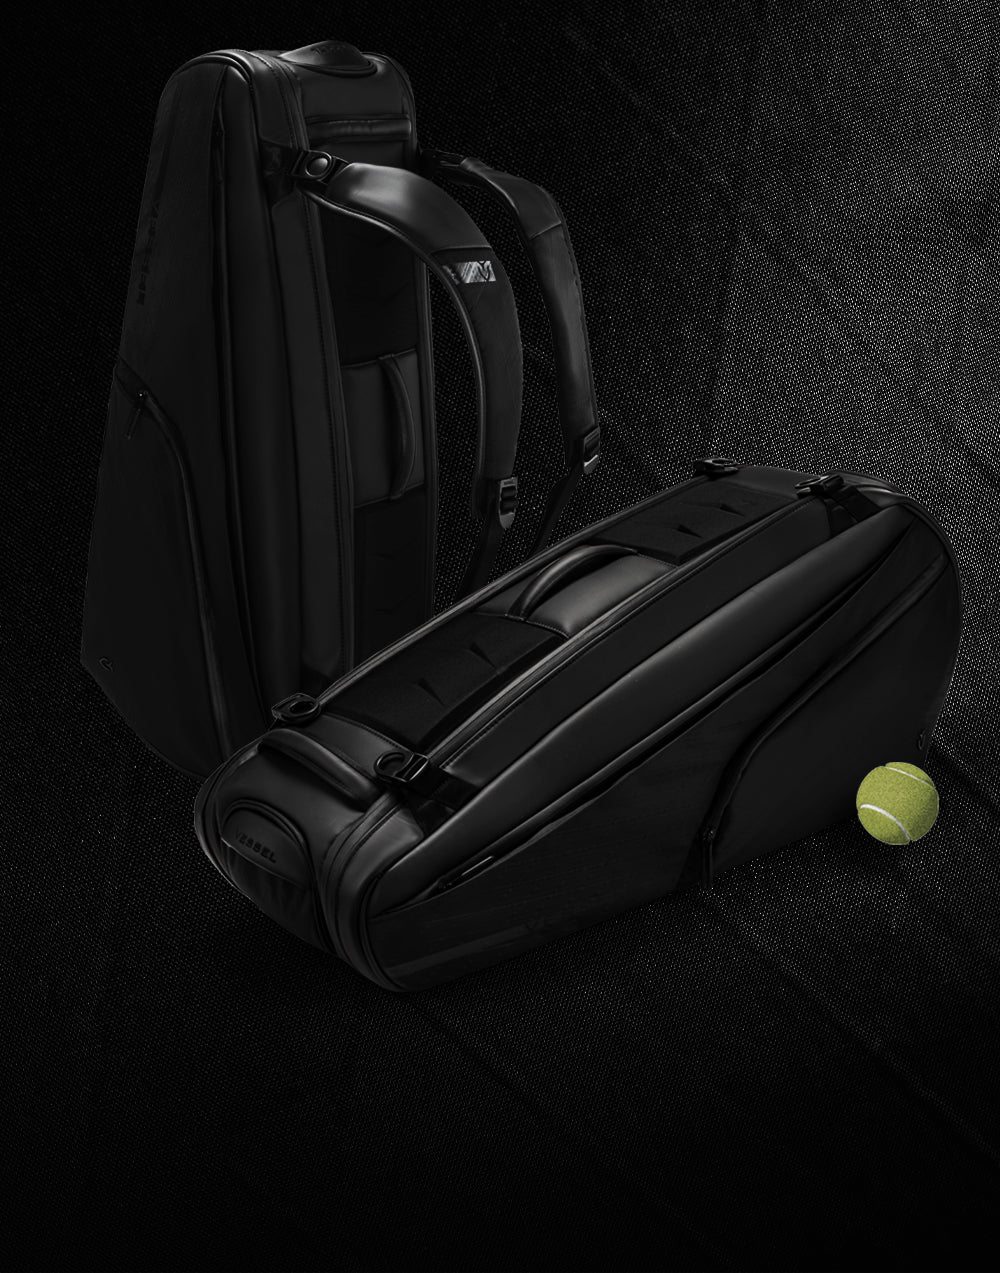 Graphic of two tennis racquet bags and a tennis ball